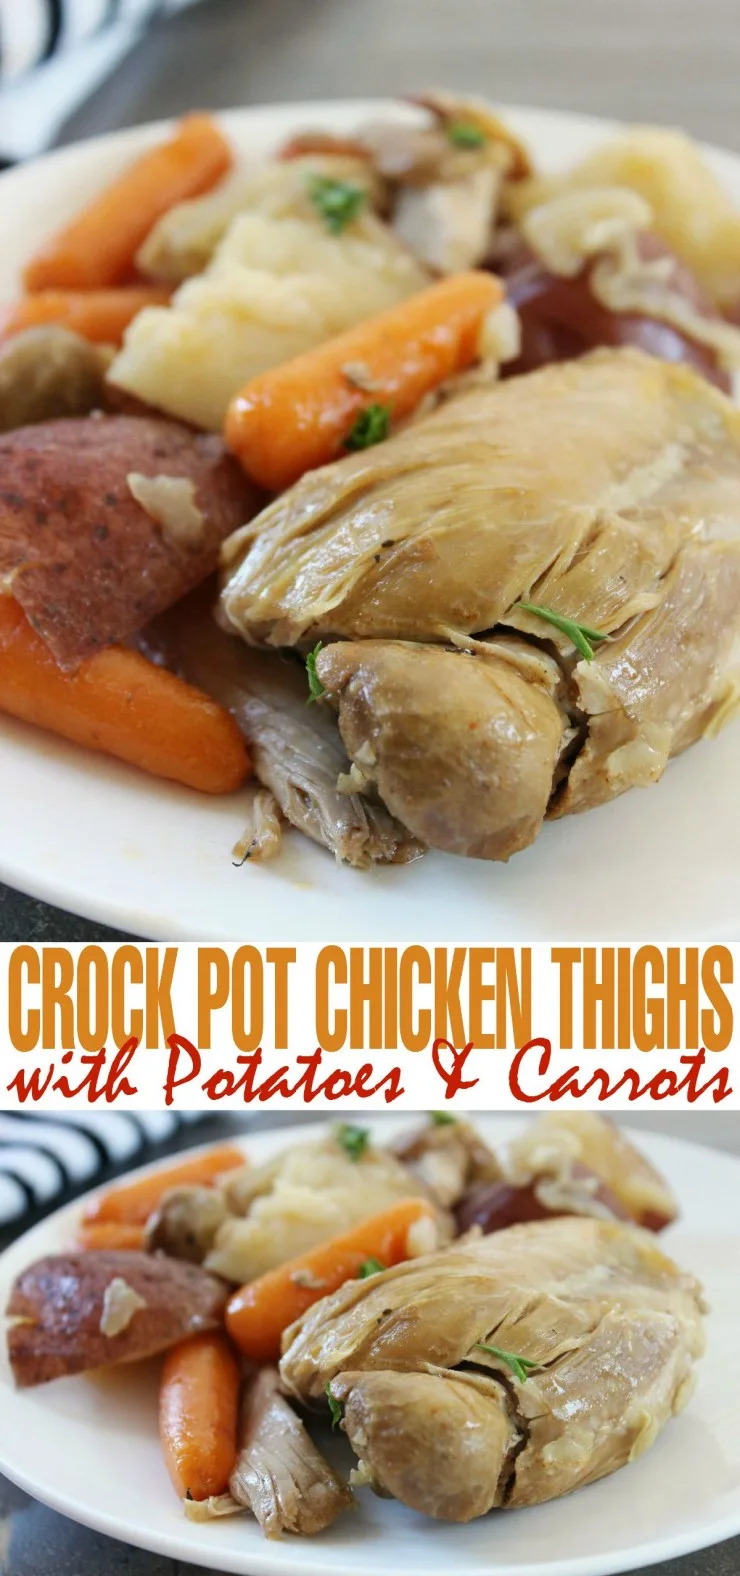 Crock Pot Chicken Thighs with Potatoes & Carrots